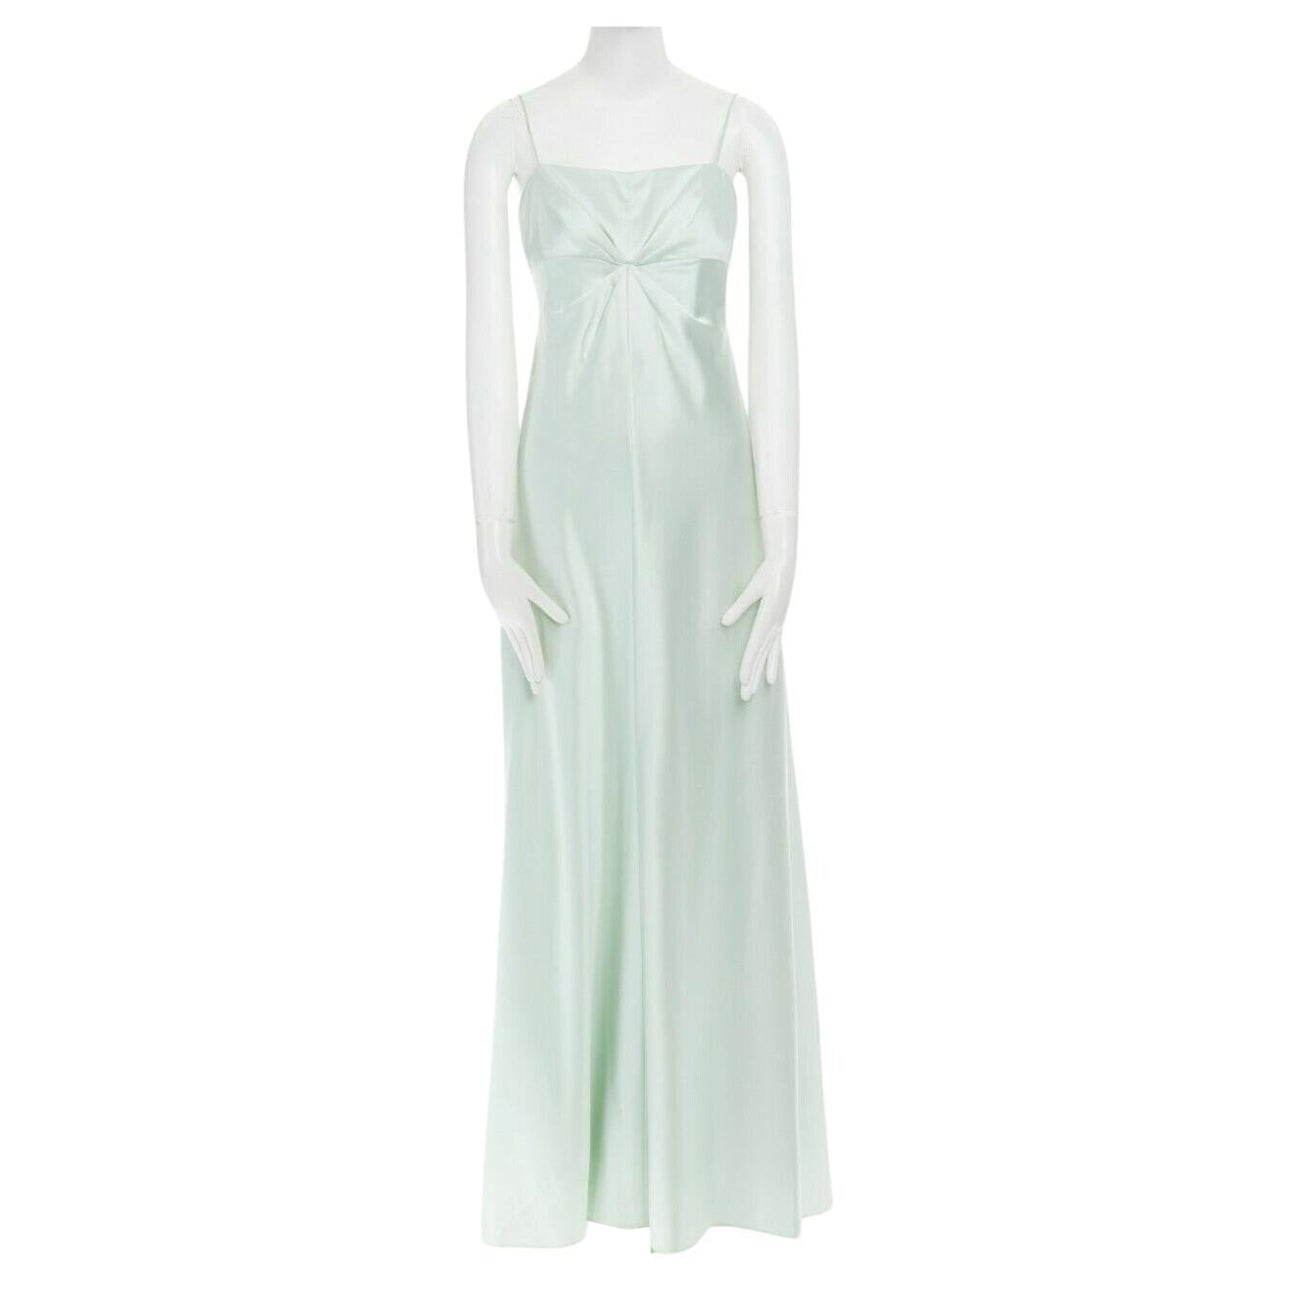 LAUNDRY SHELLI SEGAL pastel green gathered dart bust evening gown US8 M